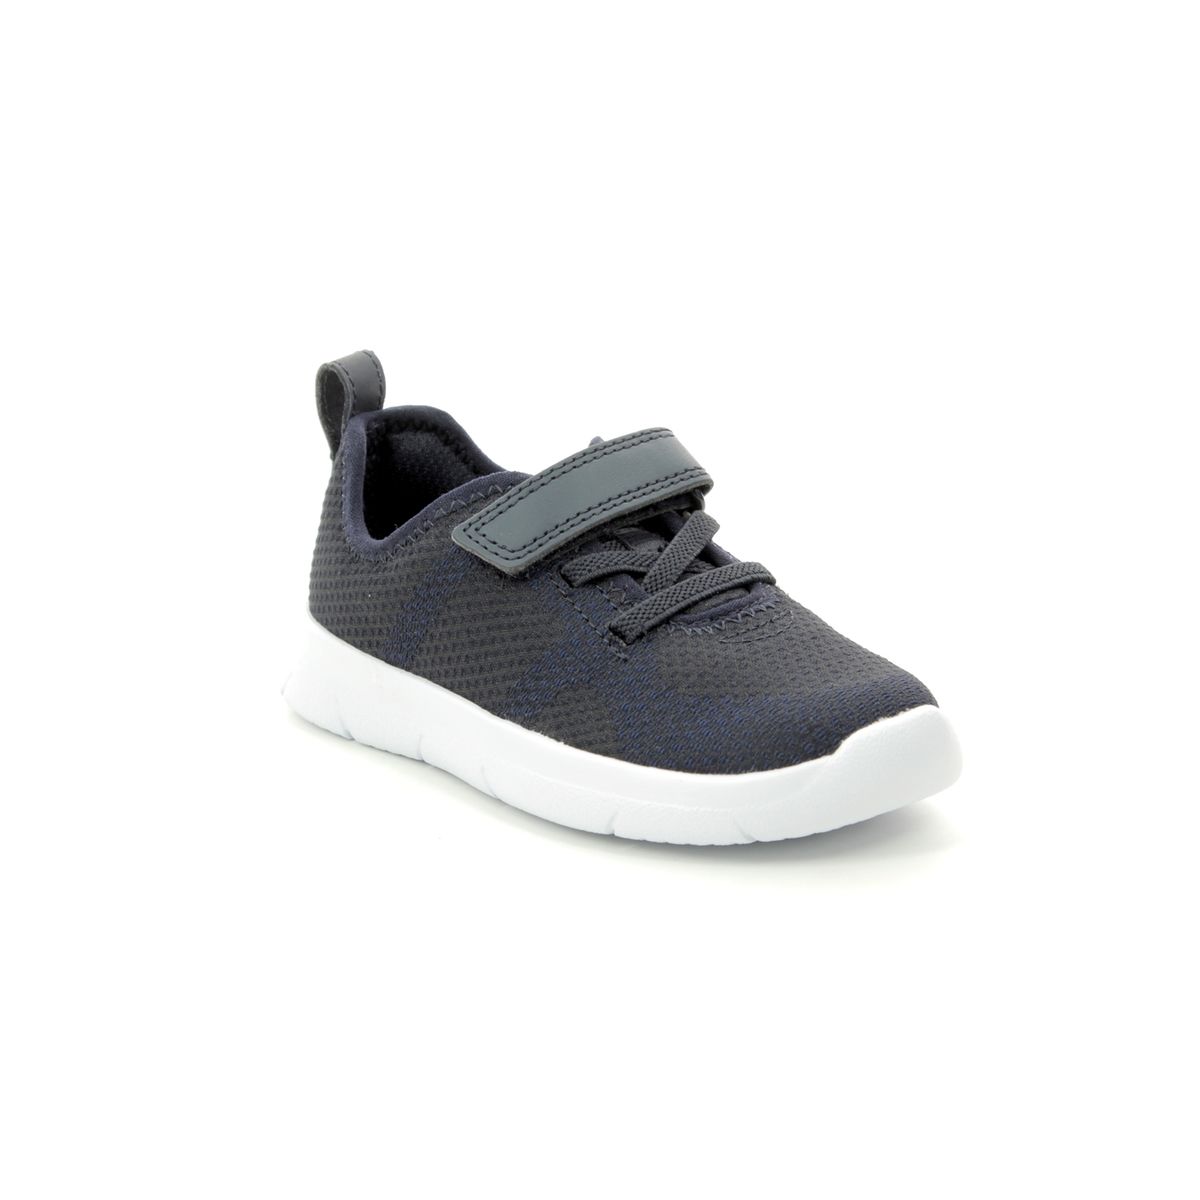 Clarks Ath Flux T Navy Kids Toddler Boys Trainers 412697G In Size 8.5 In Plain Navy G Width Fitting For kids